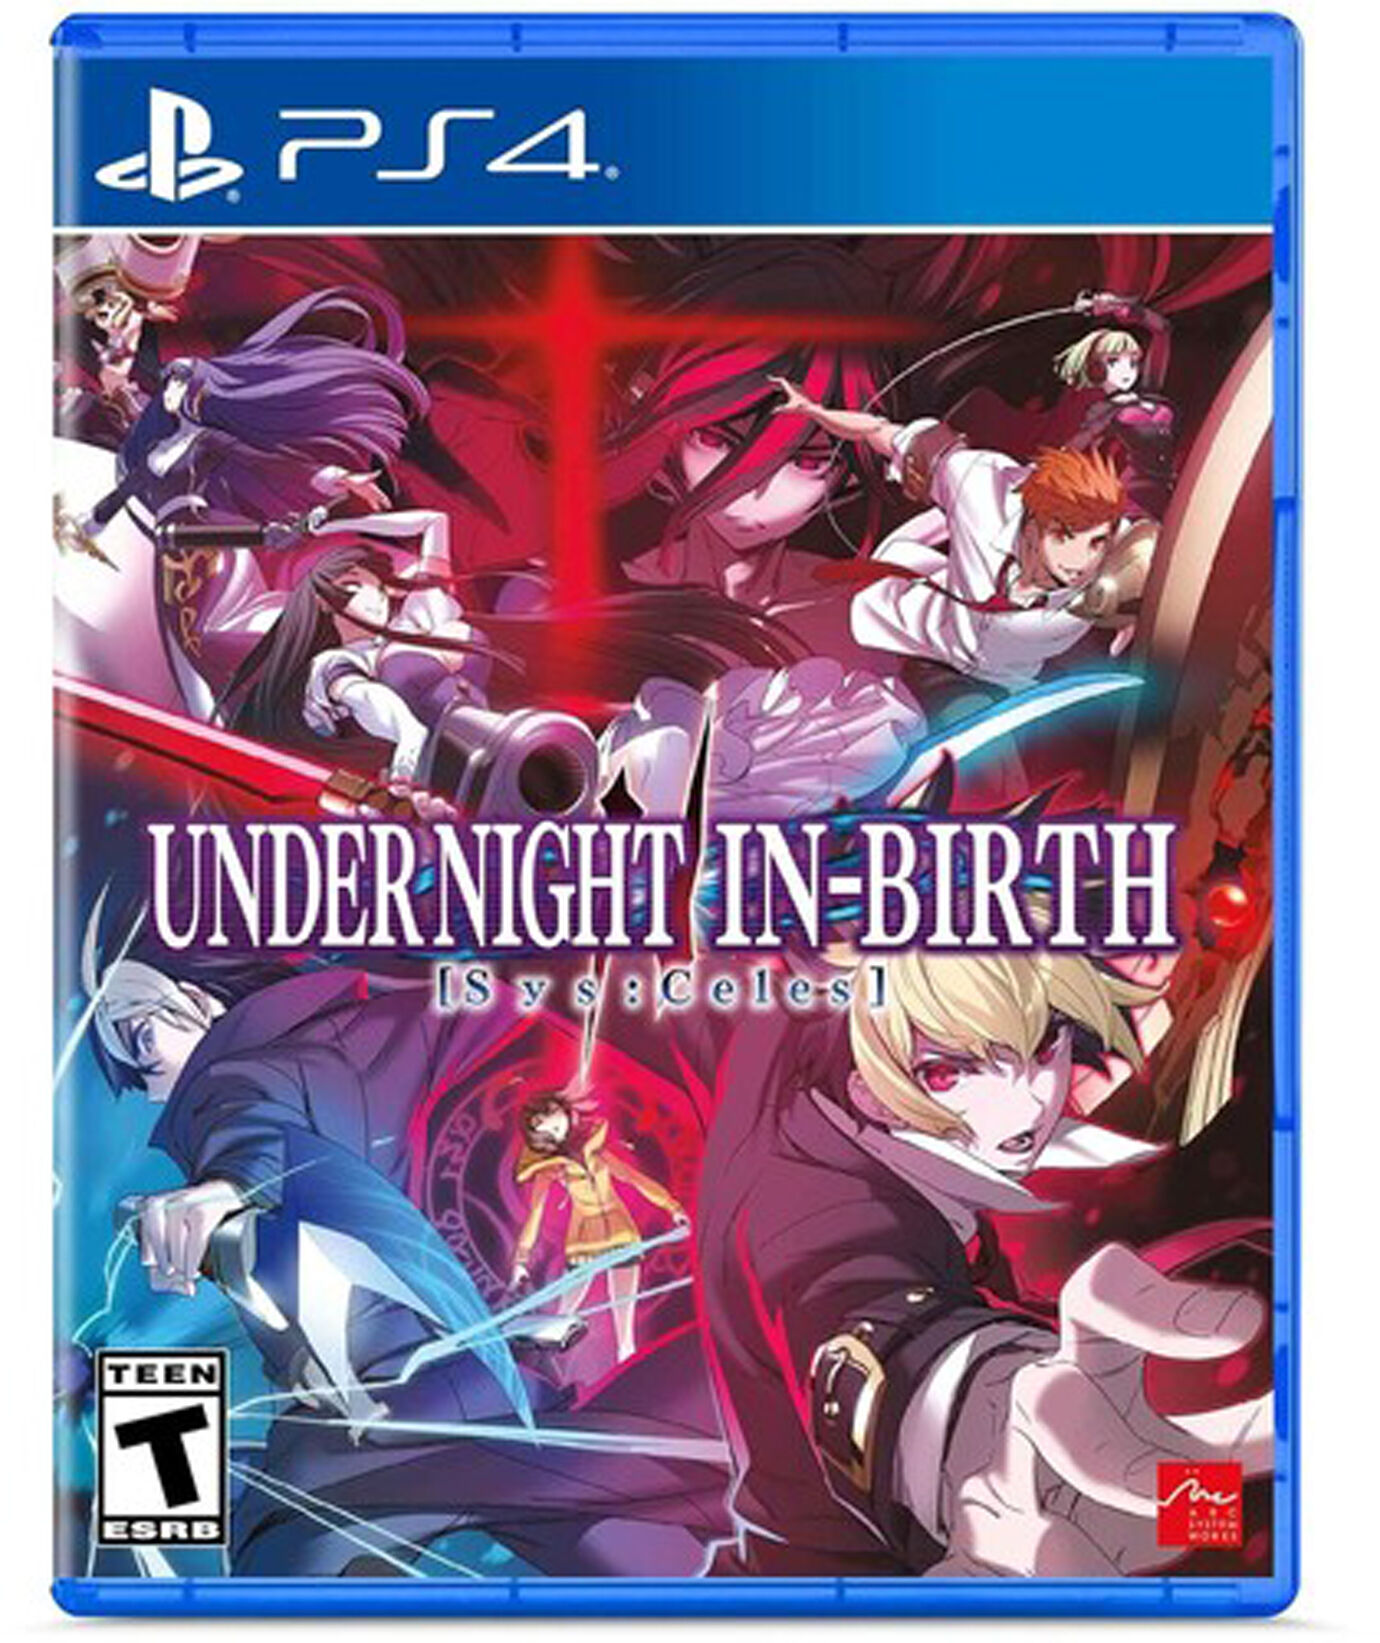 UNDER NIGHT IN-BIRTH II [Sys:Celes] for PlayStation 4